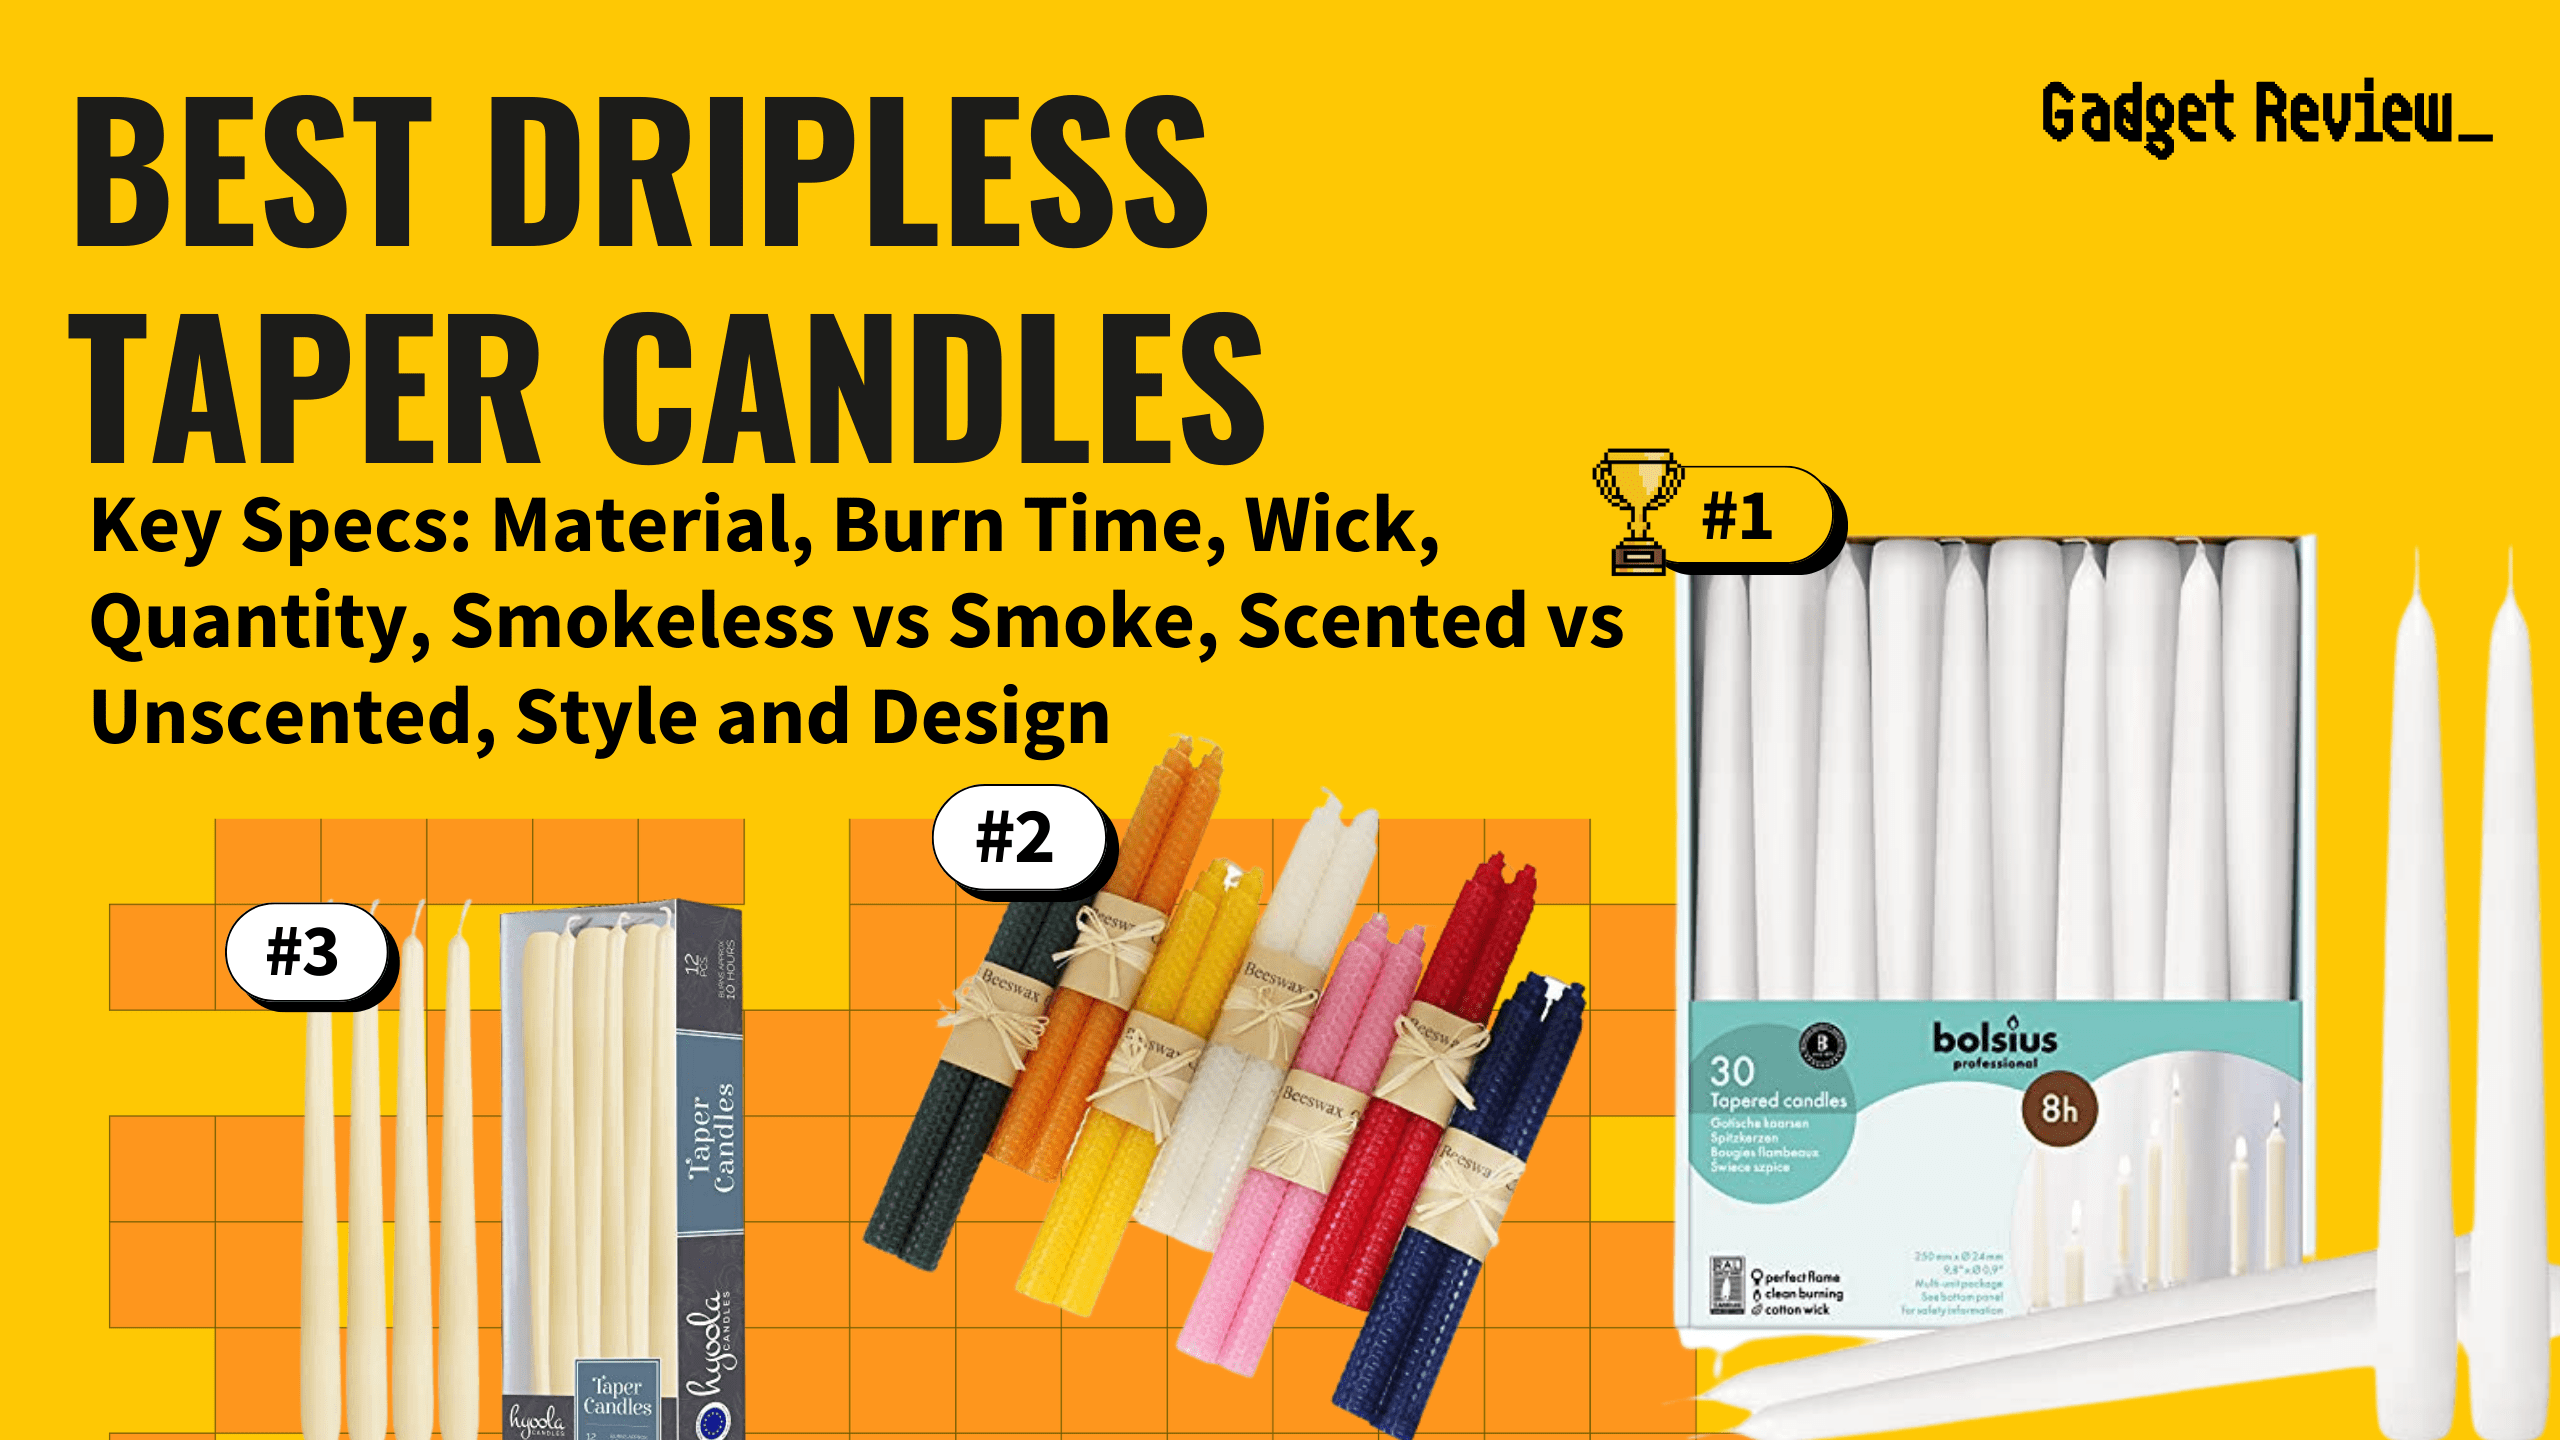 best dripless taper candles featured image that shows the top three best home appliance models